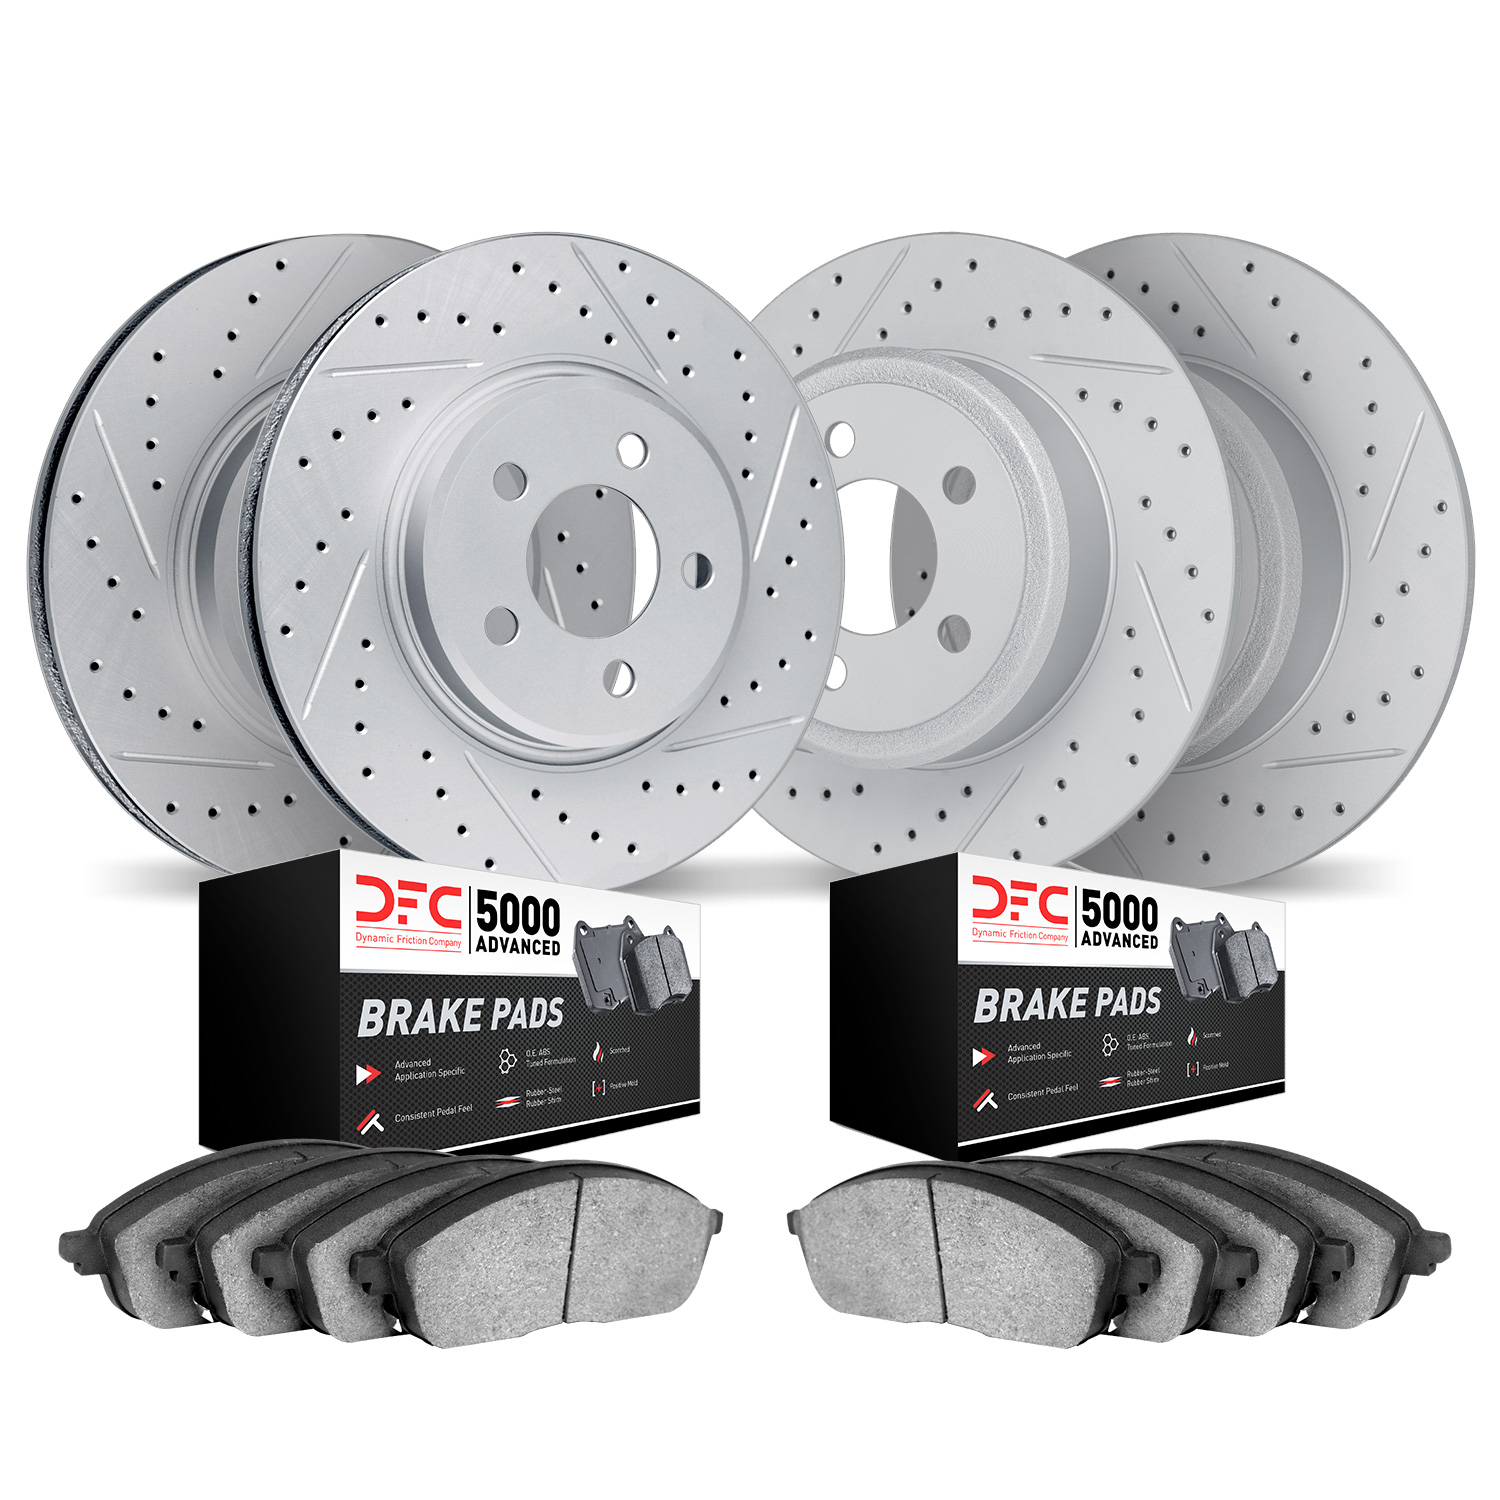 2504-27014 Geoperformance Drilled/Slotted Rotors w/5000 Advanced Brake Pads Kit, 2018-2020 Volvo, Position: Front and Rear